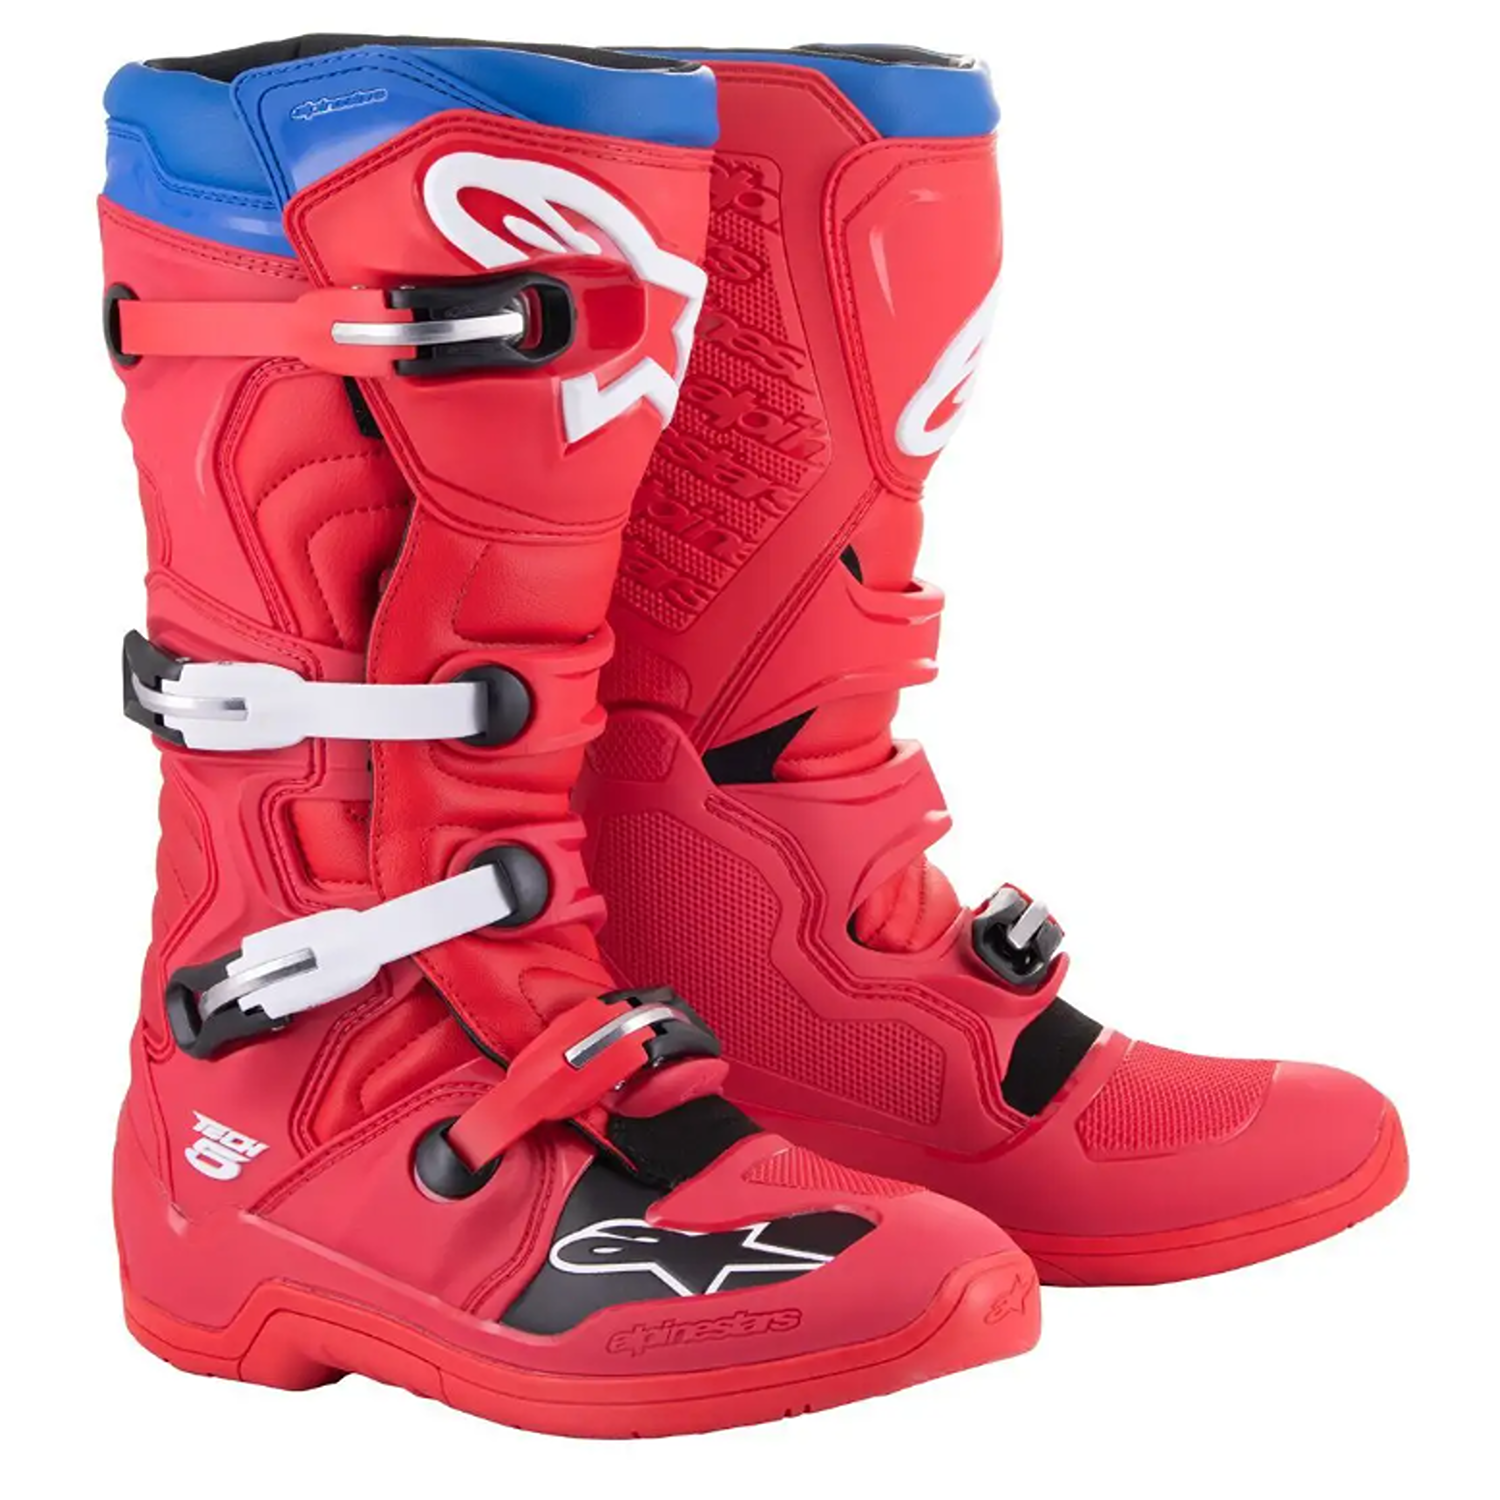 Image of Alpinestars Tech 5 Boots Bright Red Dark Red Blue Taille US 7